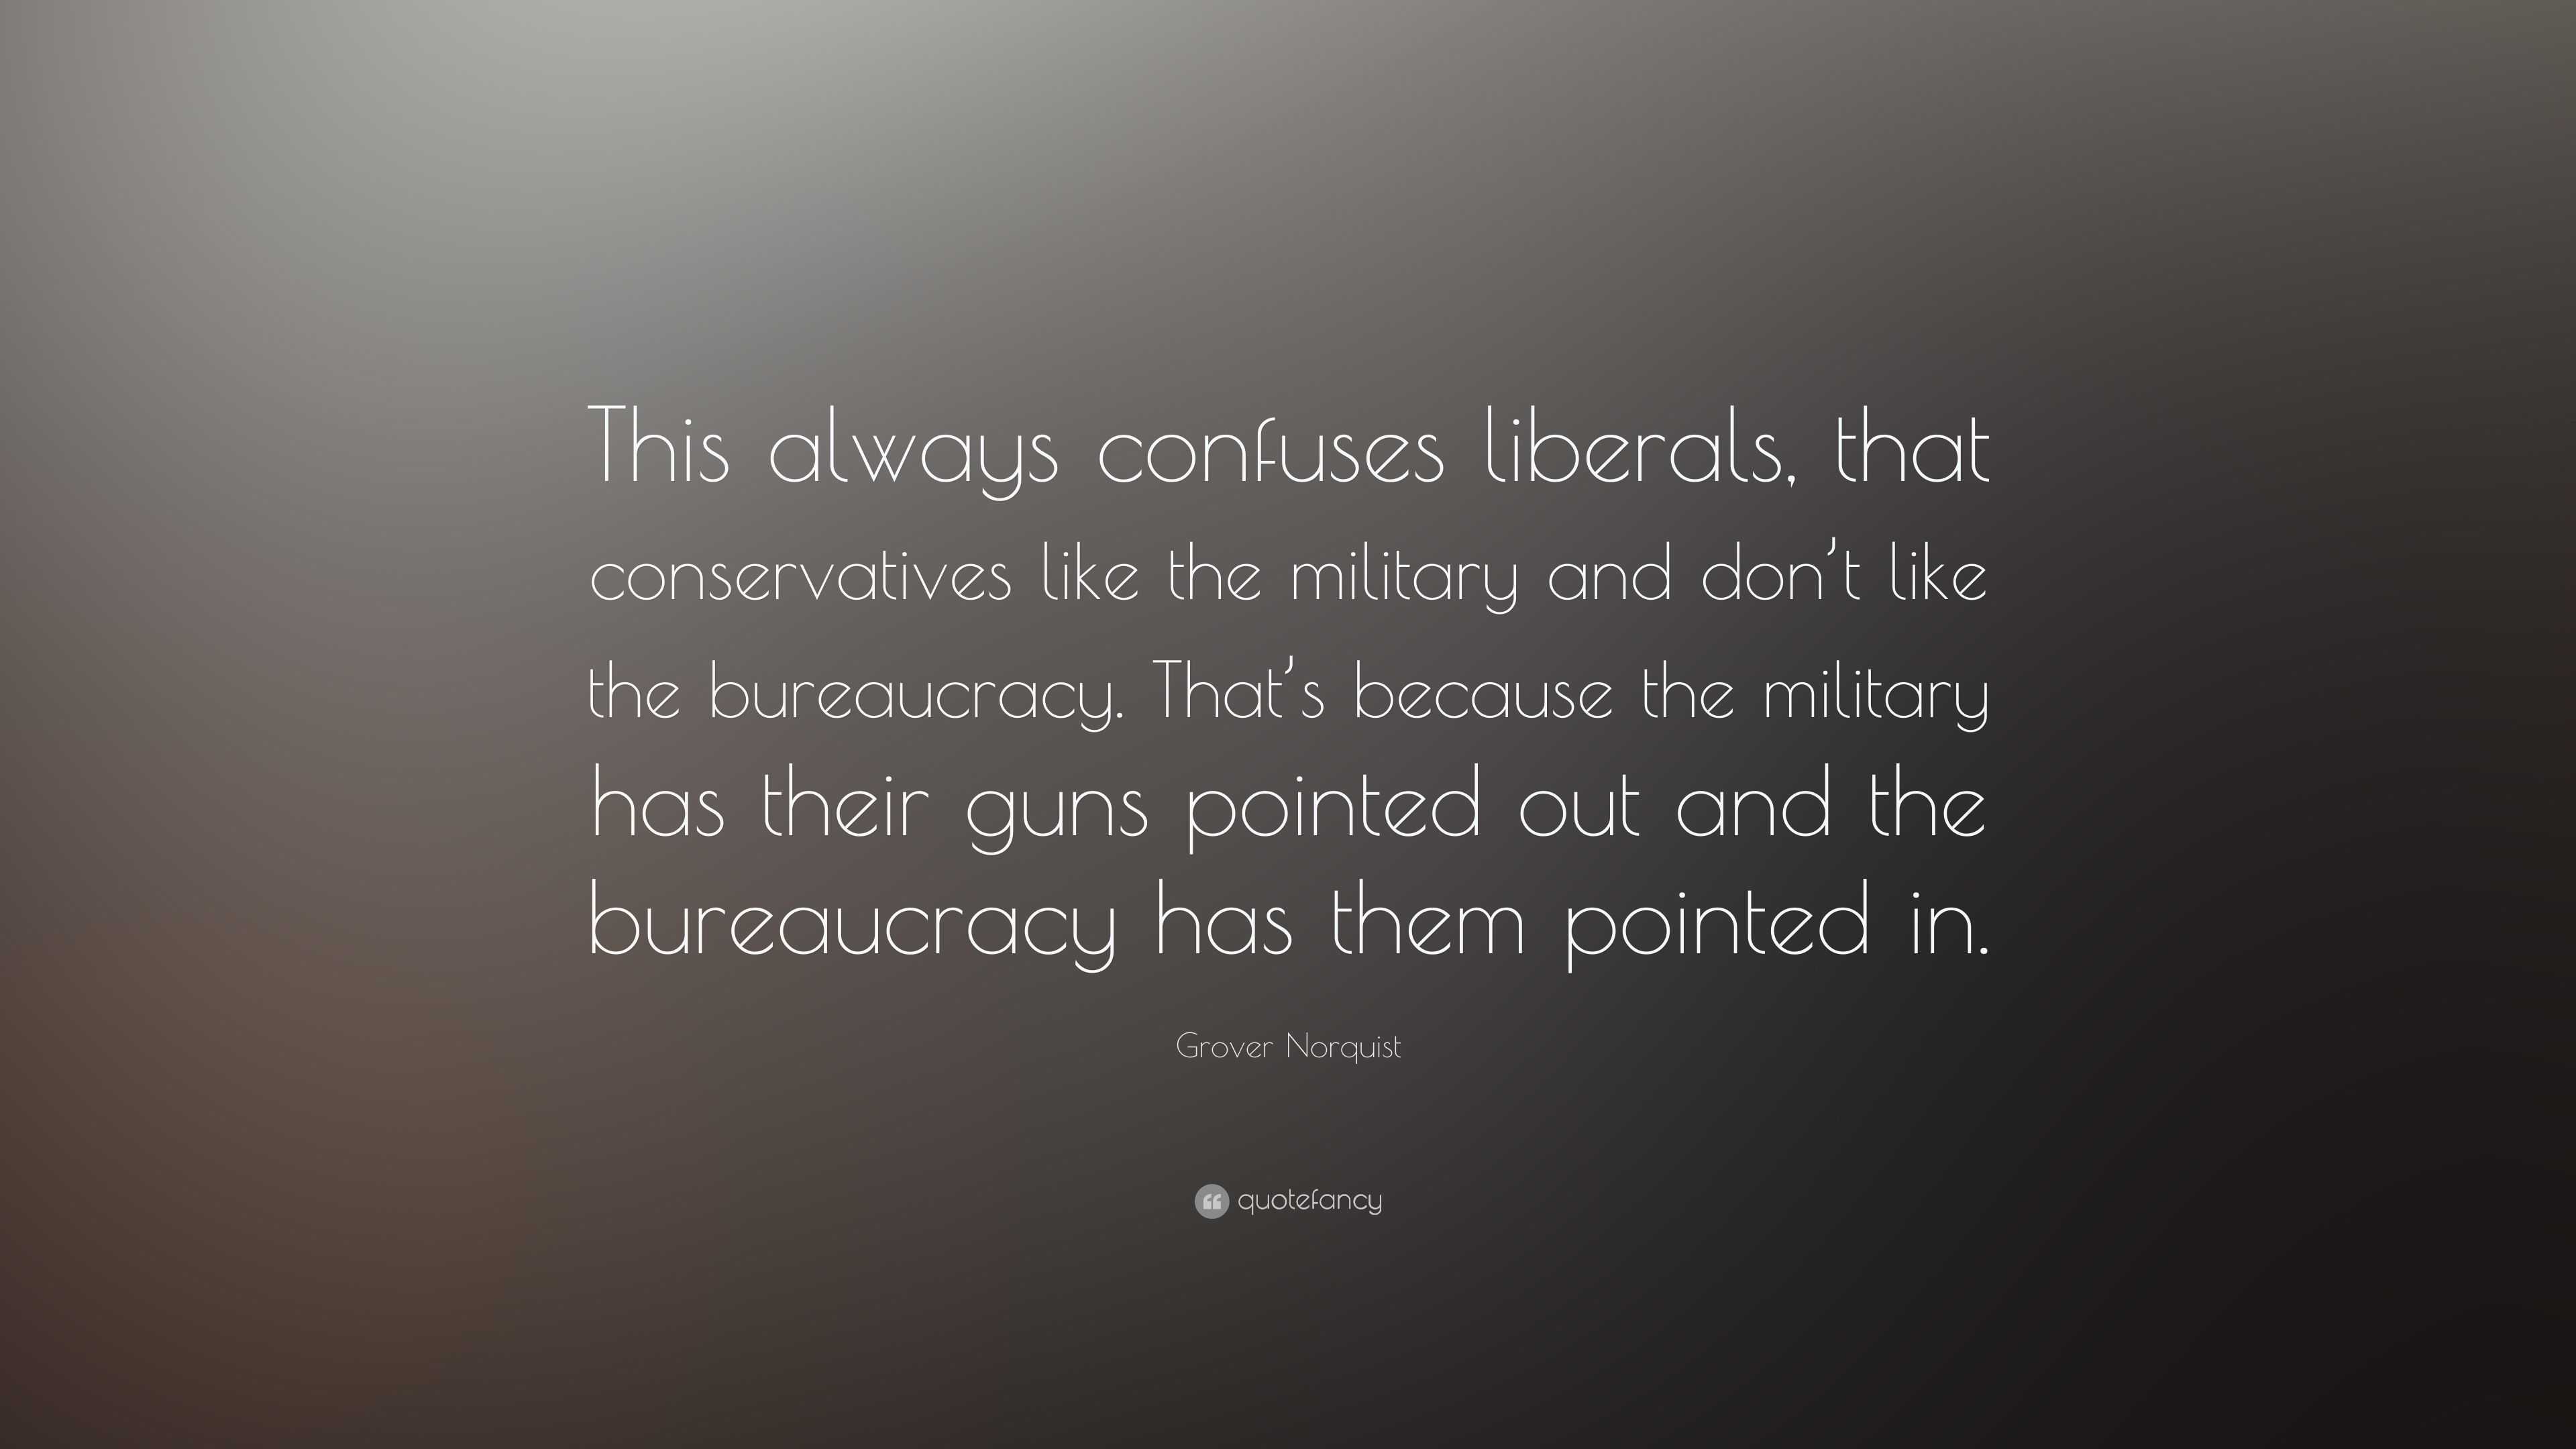 Grover Norquist Quote: “This always confuses liberals, that ...